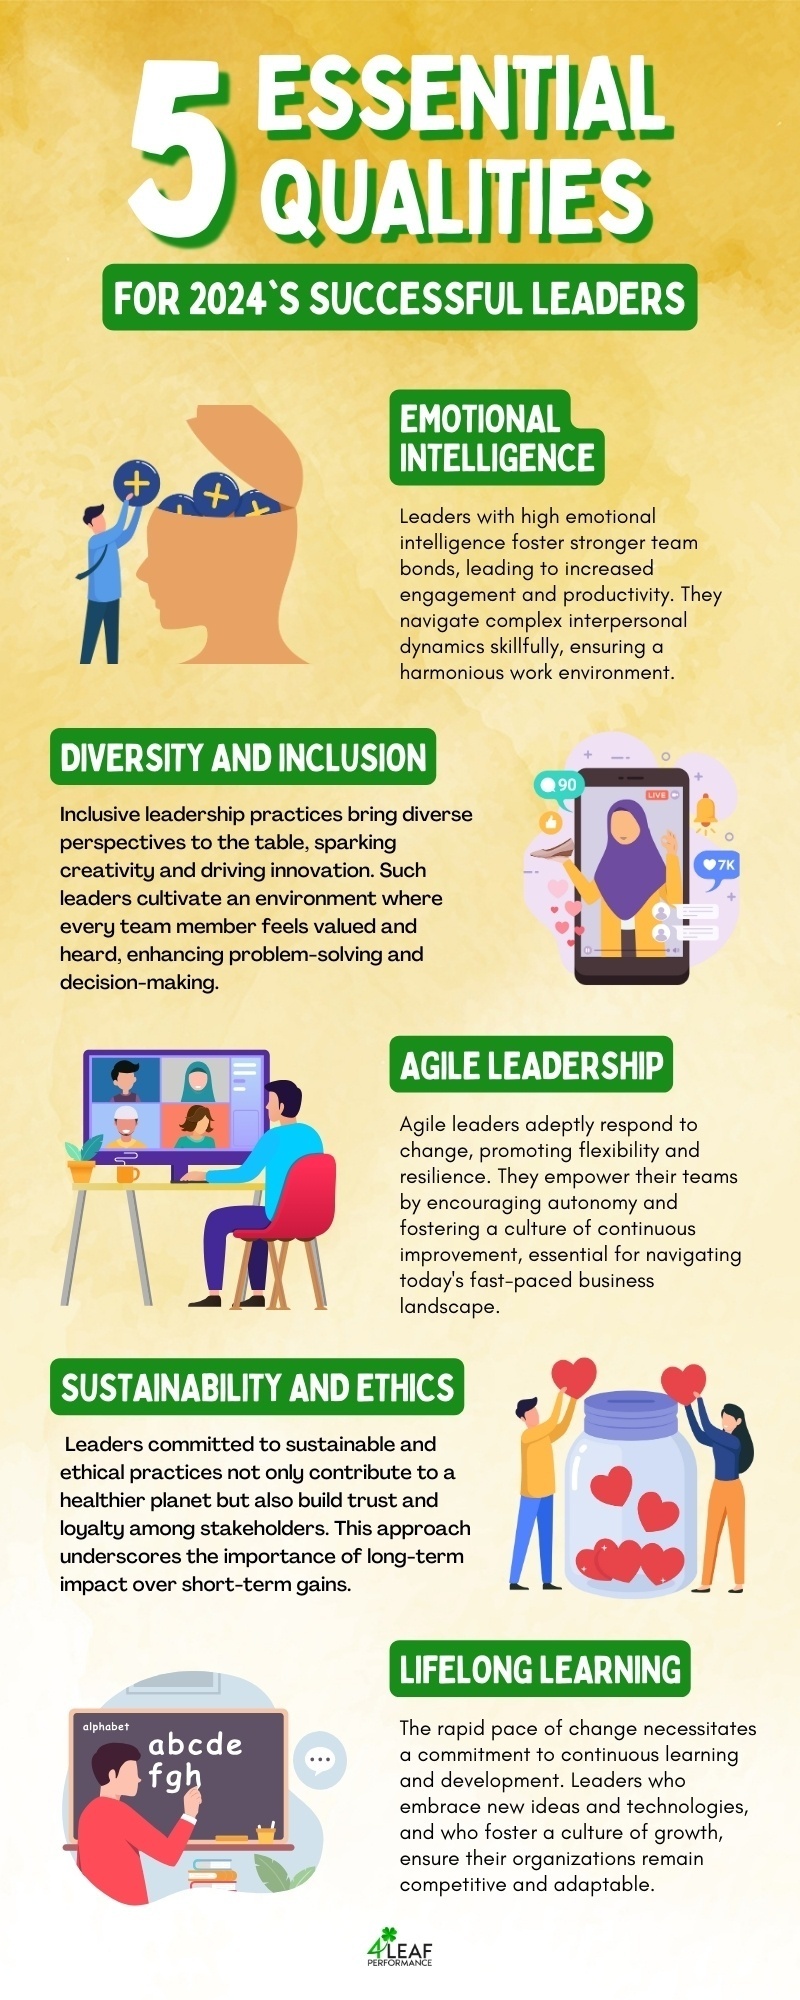 5 Essential Qualities For 2024's Successful Leaders